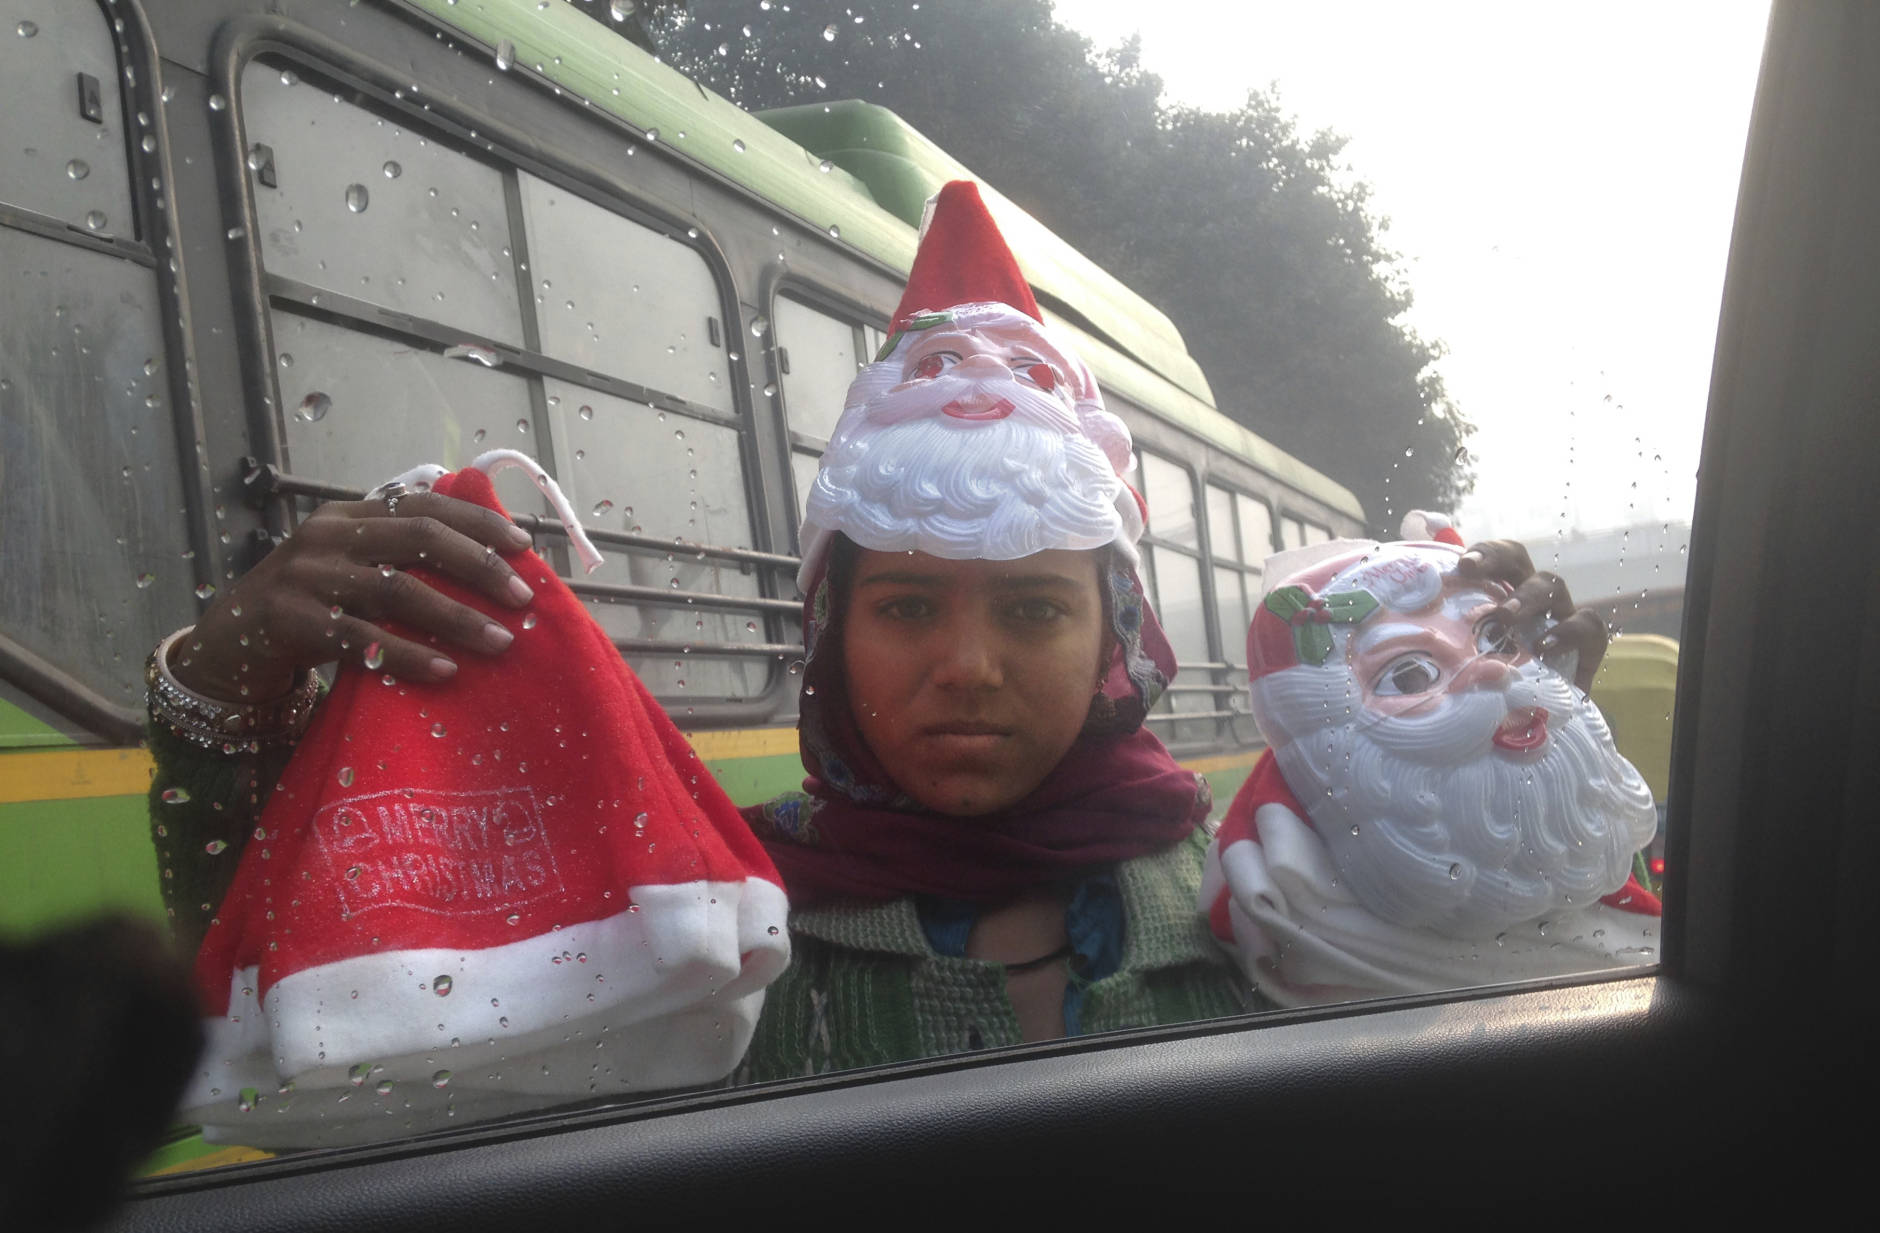 A girls sells Santa caps and masks at a traffic intersection on the Christmas eve in New Delhi, India, Saturday, Dec. 24, 2016. Though the Hindus and Muslims comprise majority of the population in India, Christmas is a national holiday celebrated with much fanfare. (AP Photo/Yirmiyan Arthur)